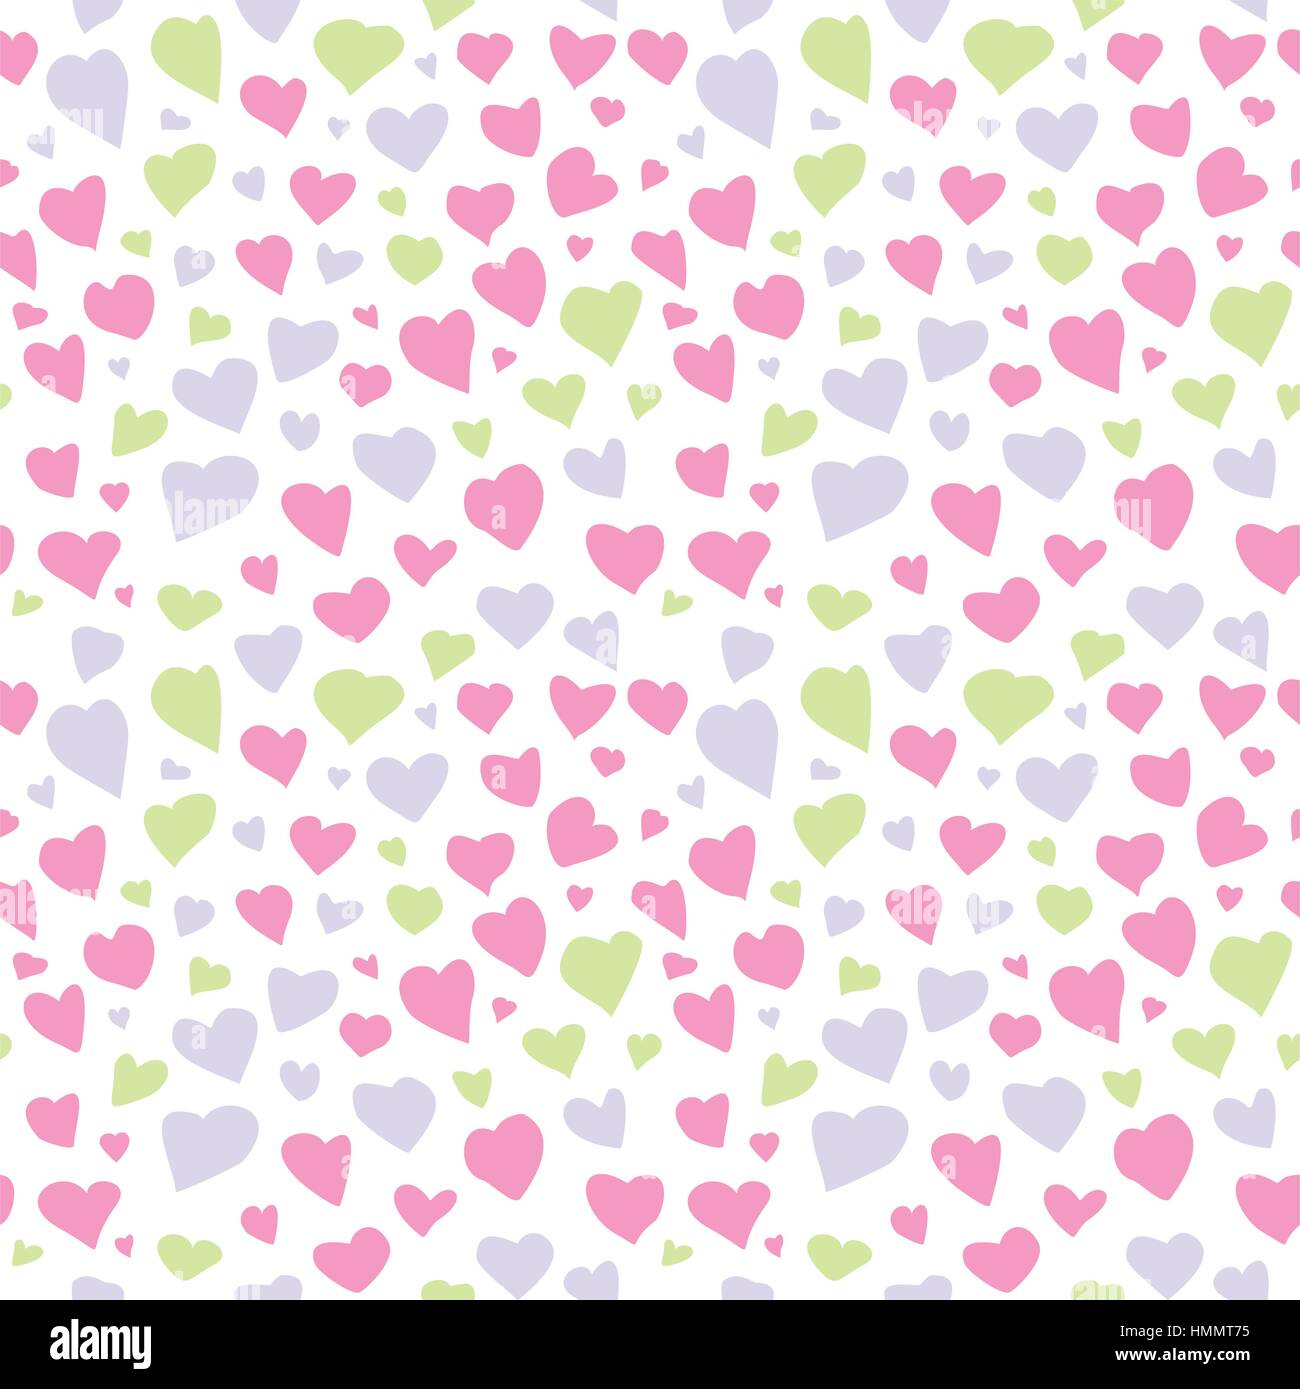 Abstract Hearts Seamless Pattern Texture Stock Vector